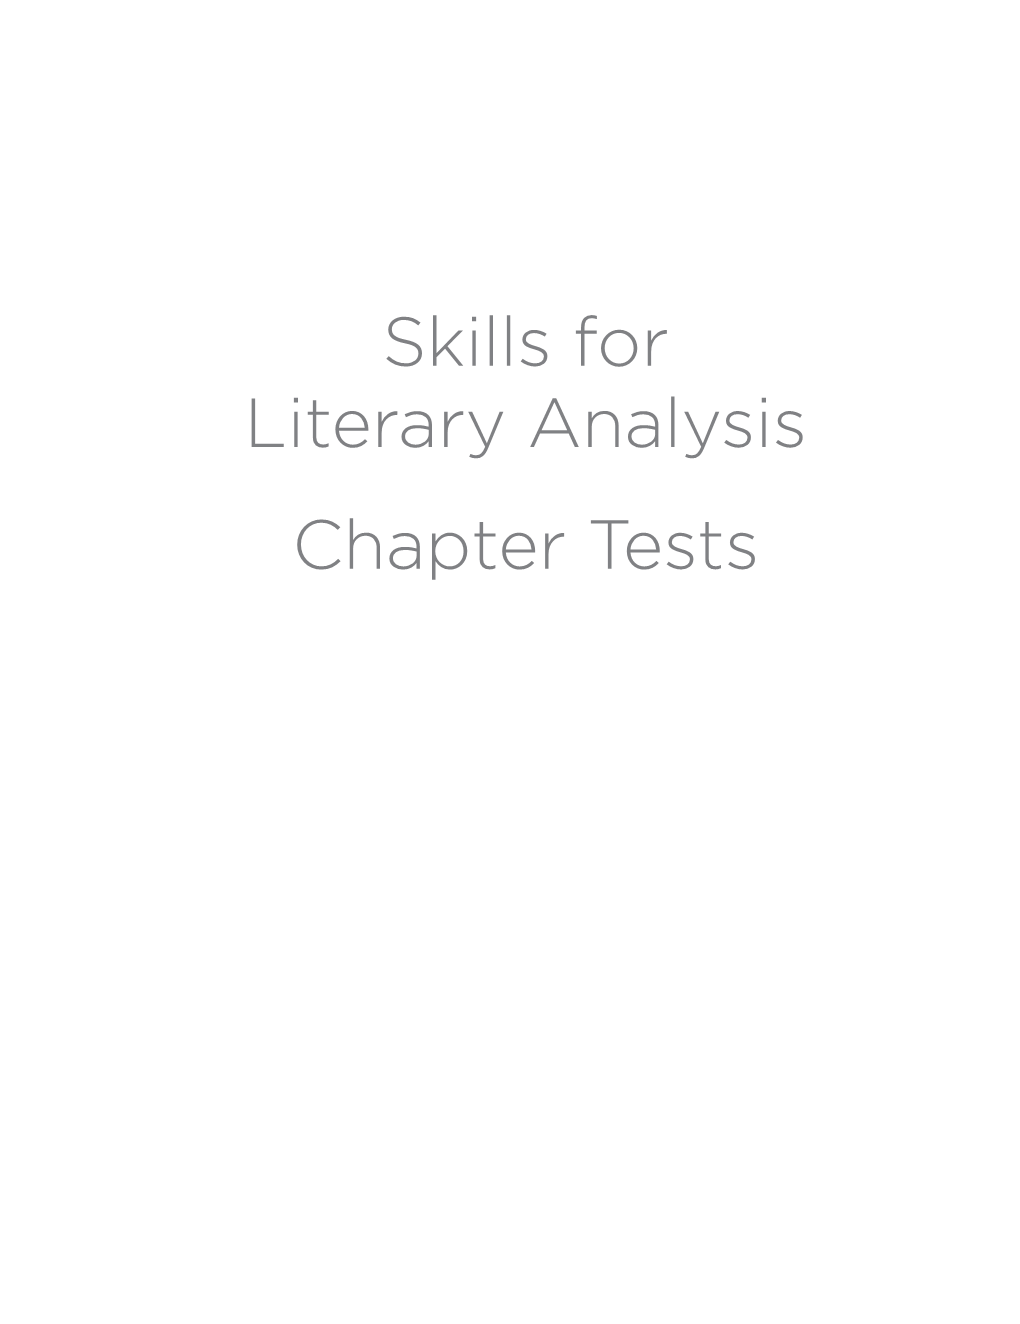 Skills for Literary Analysis Chapter Tests